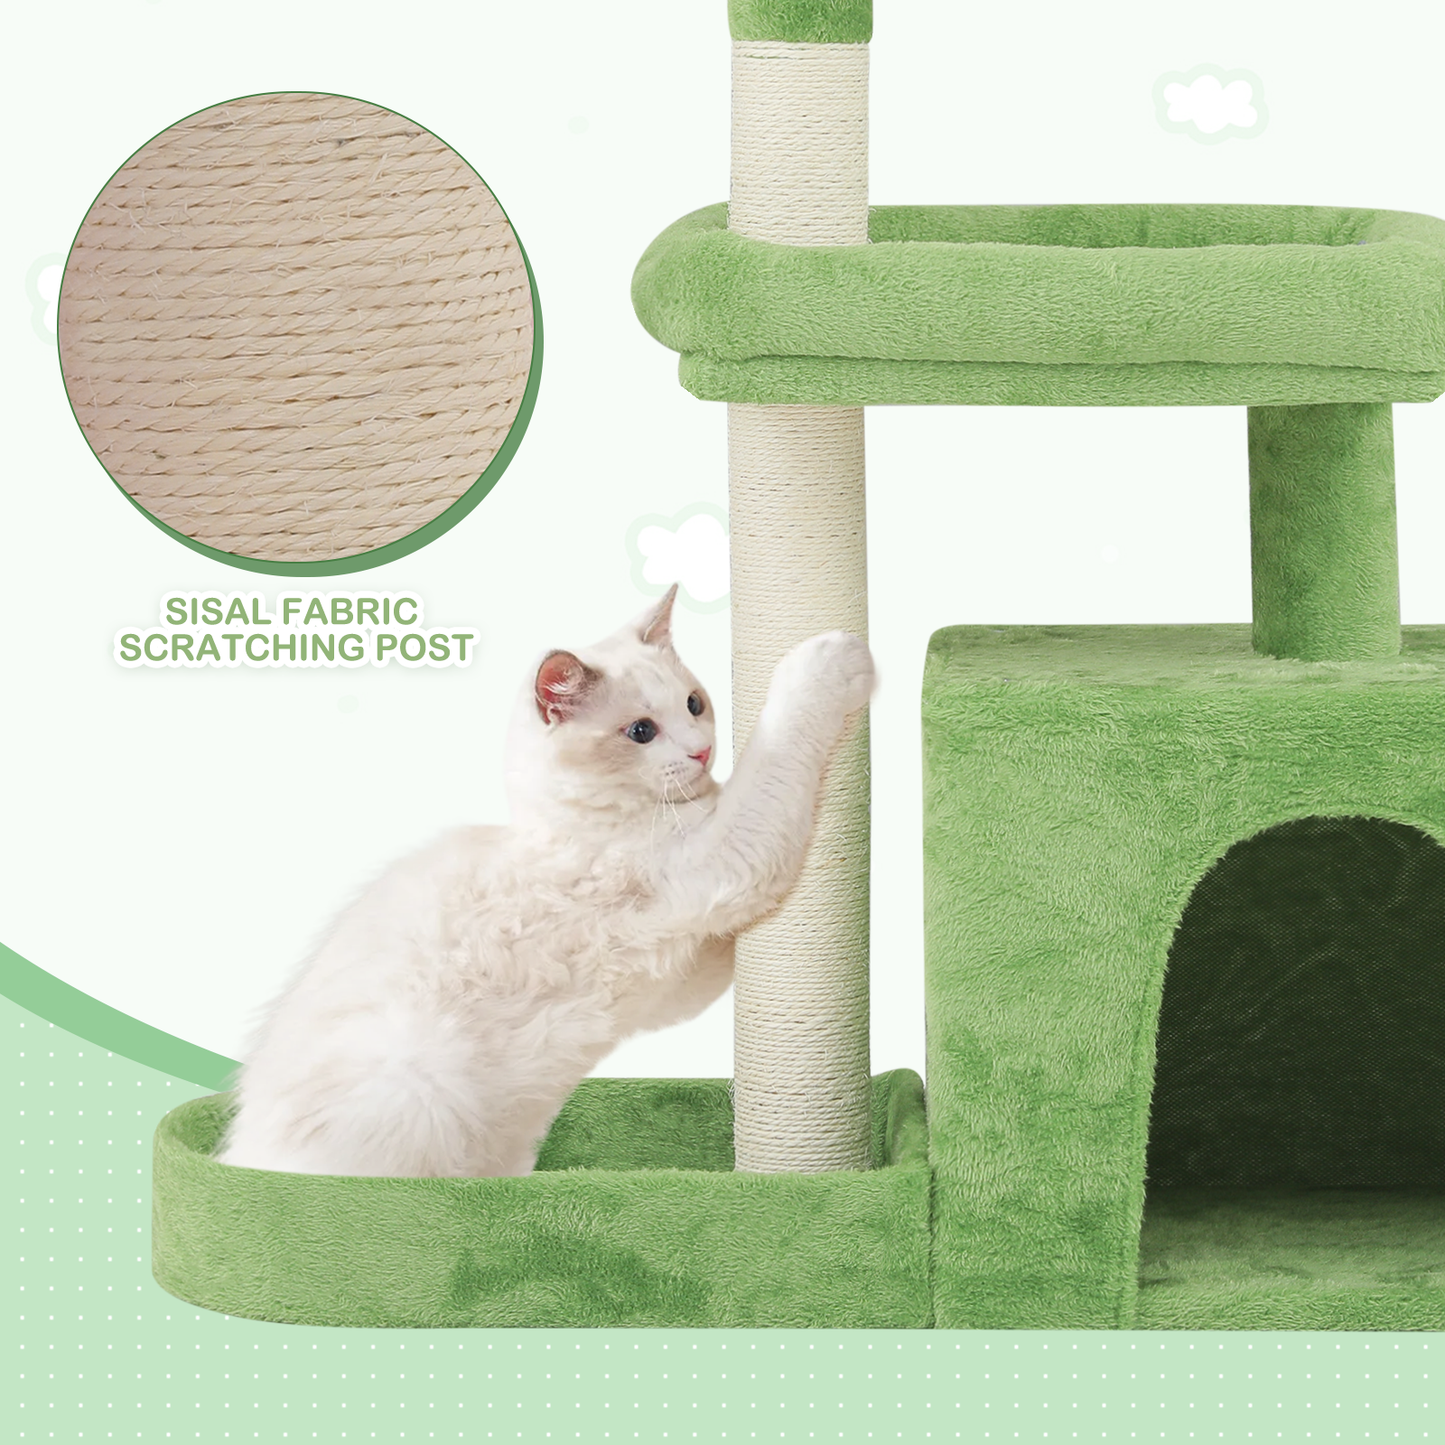 32" Height Cat Tree -Leaves Design - Lawn Green